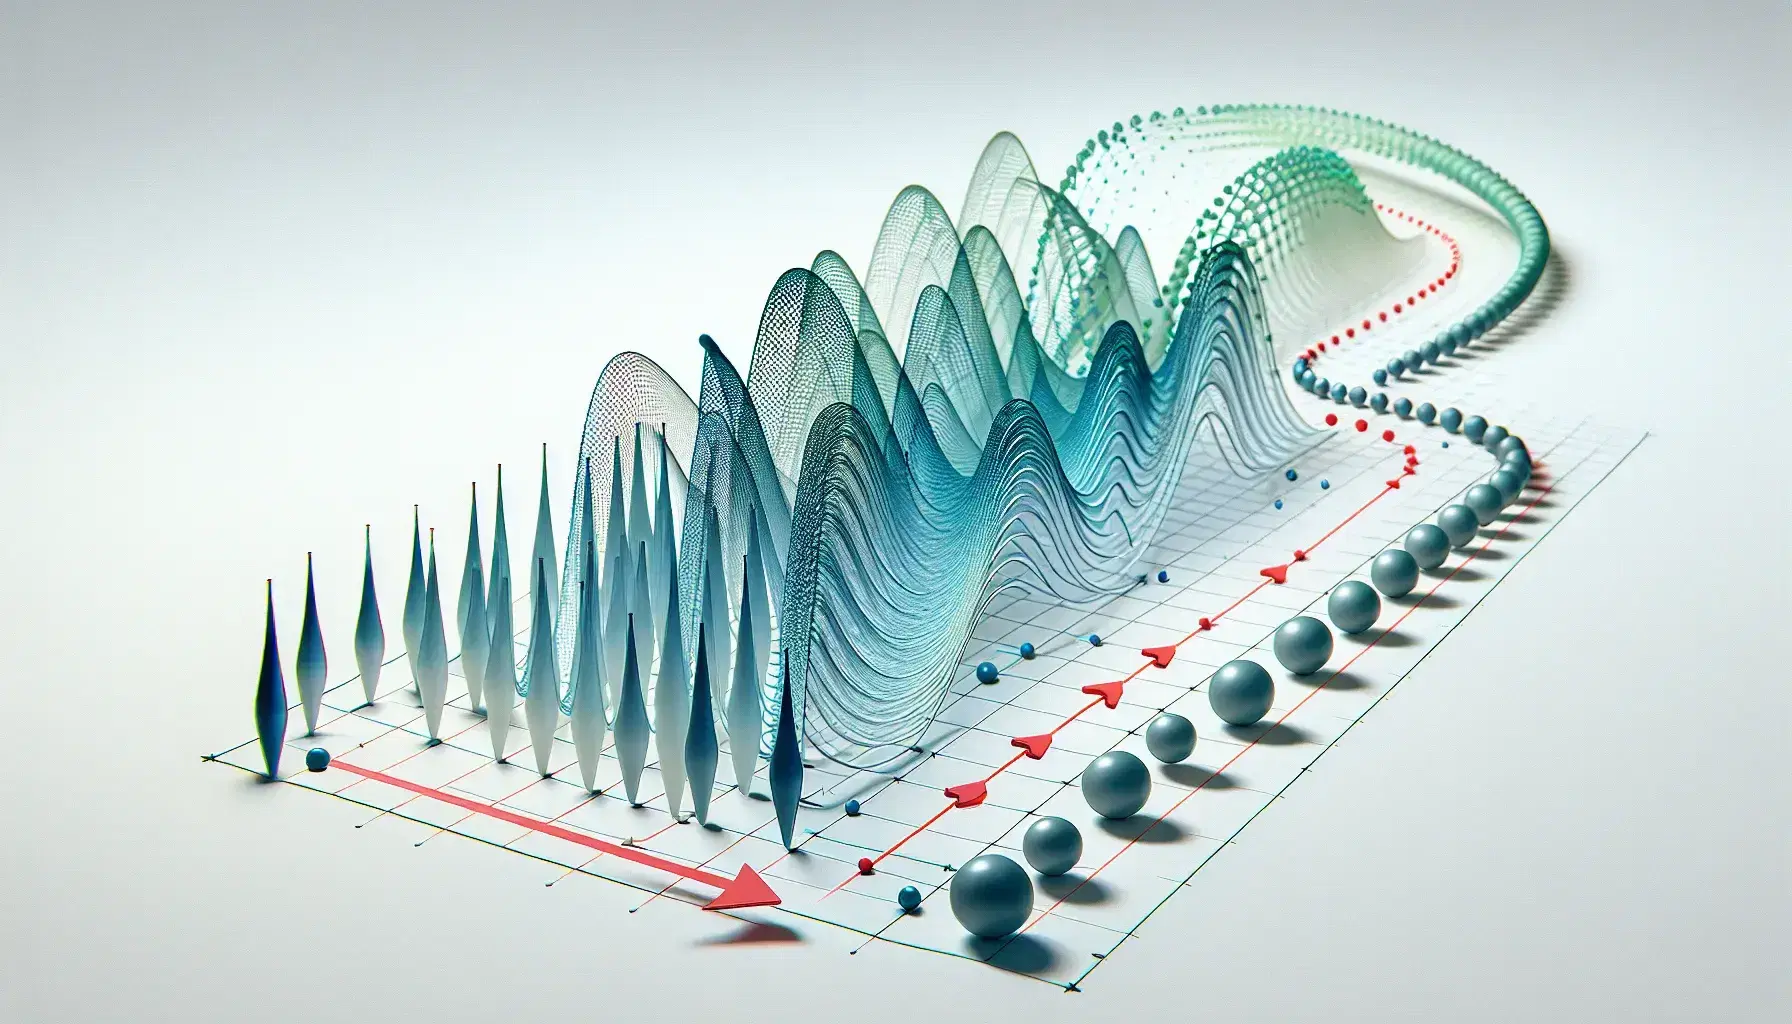 Translucent blue arrows form a flowing path with gradient green spheres alongside, and a bold red vector points upwards in a 3D space.